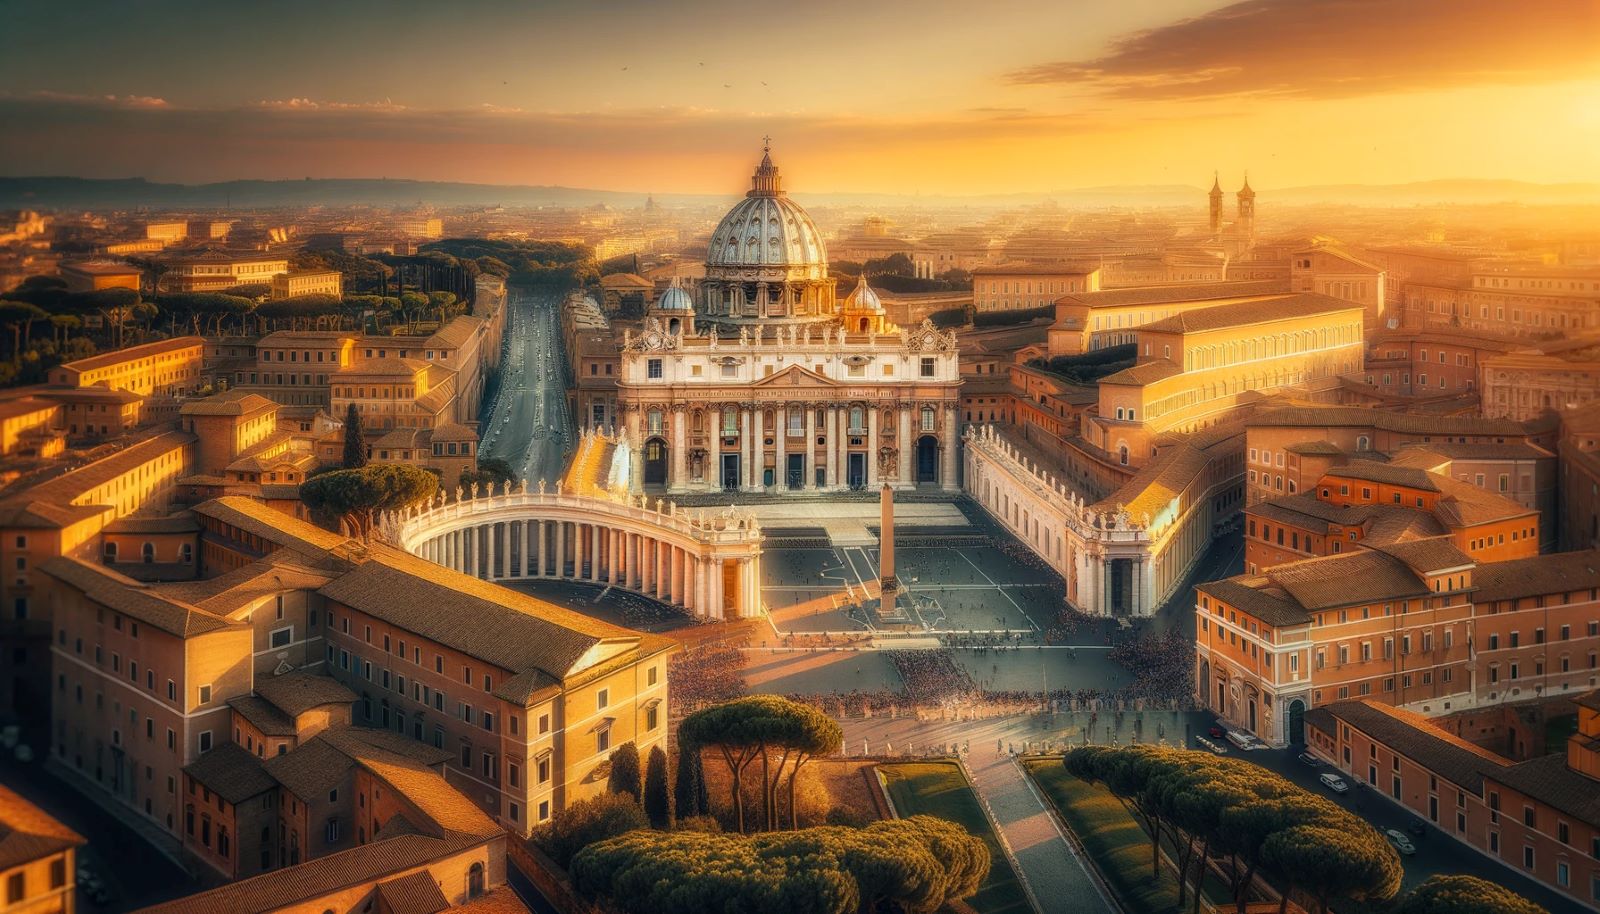 What City Is The Sistine Chapel Located?